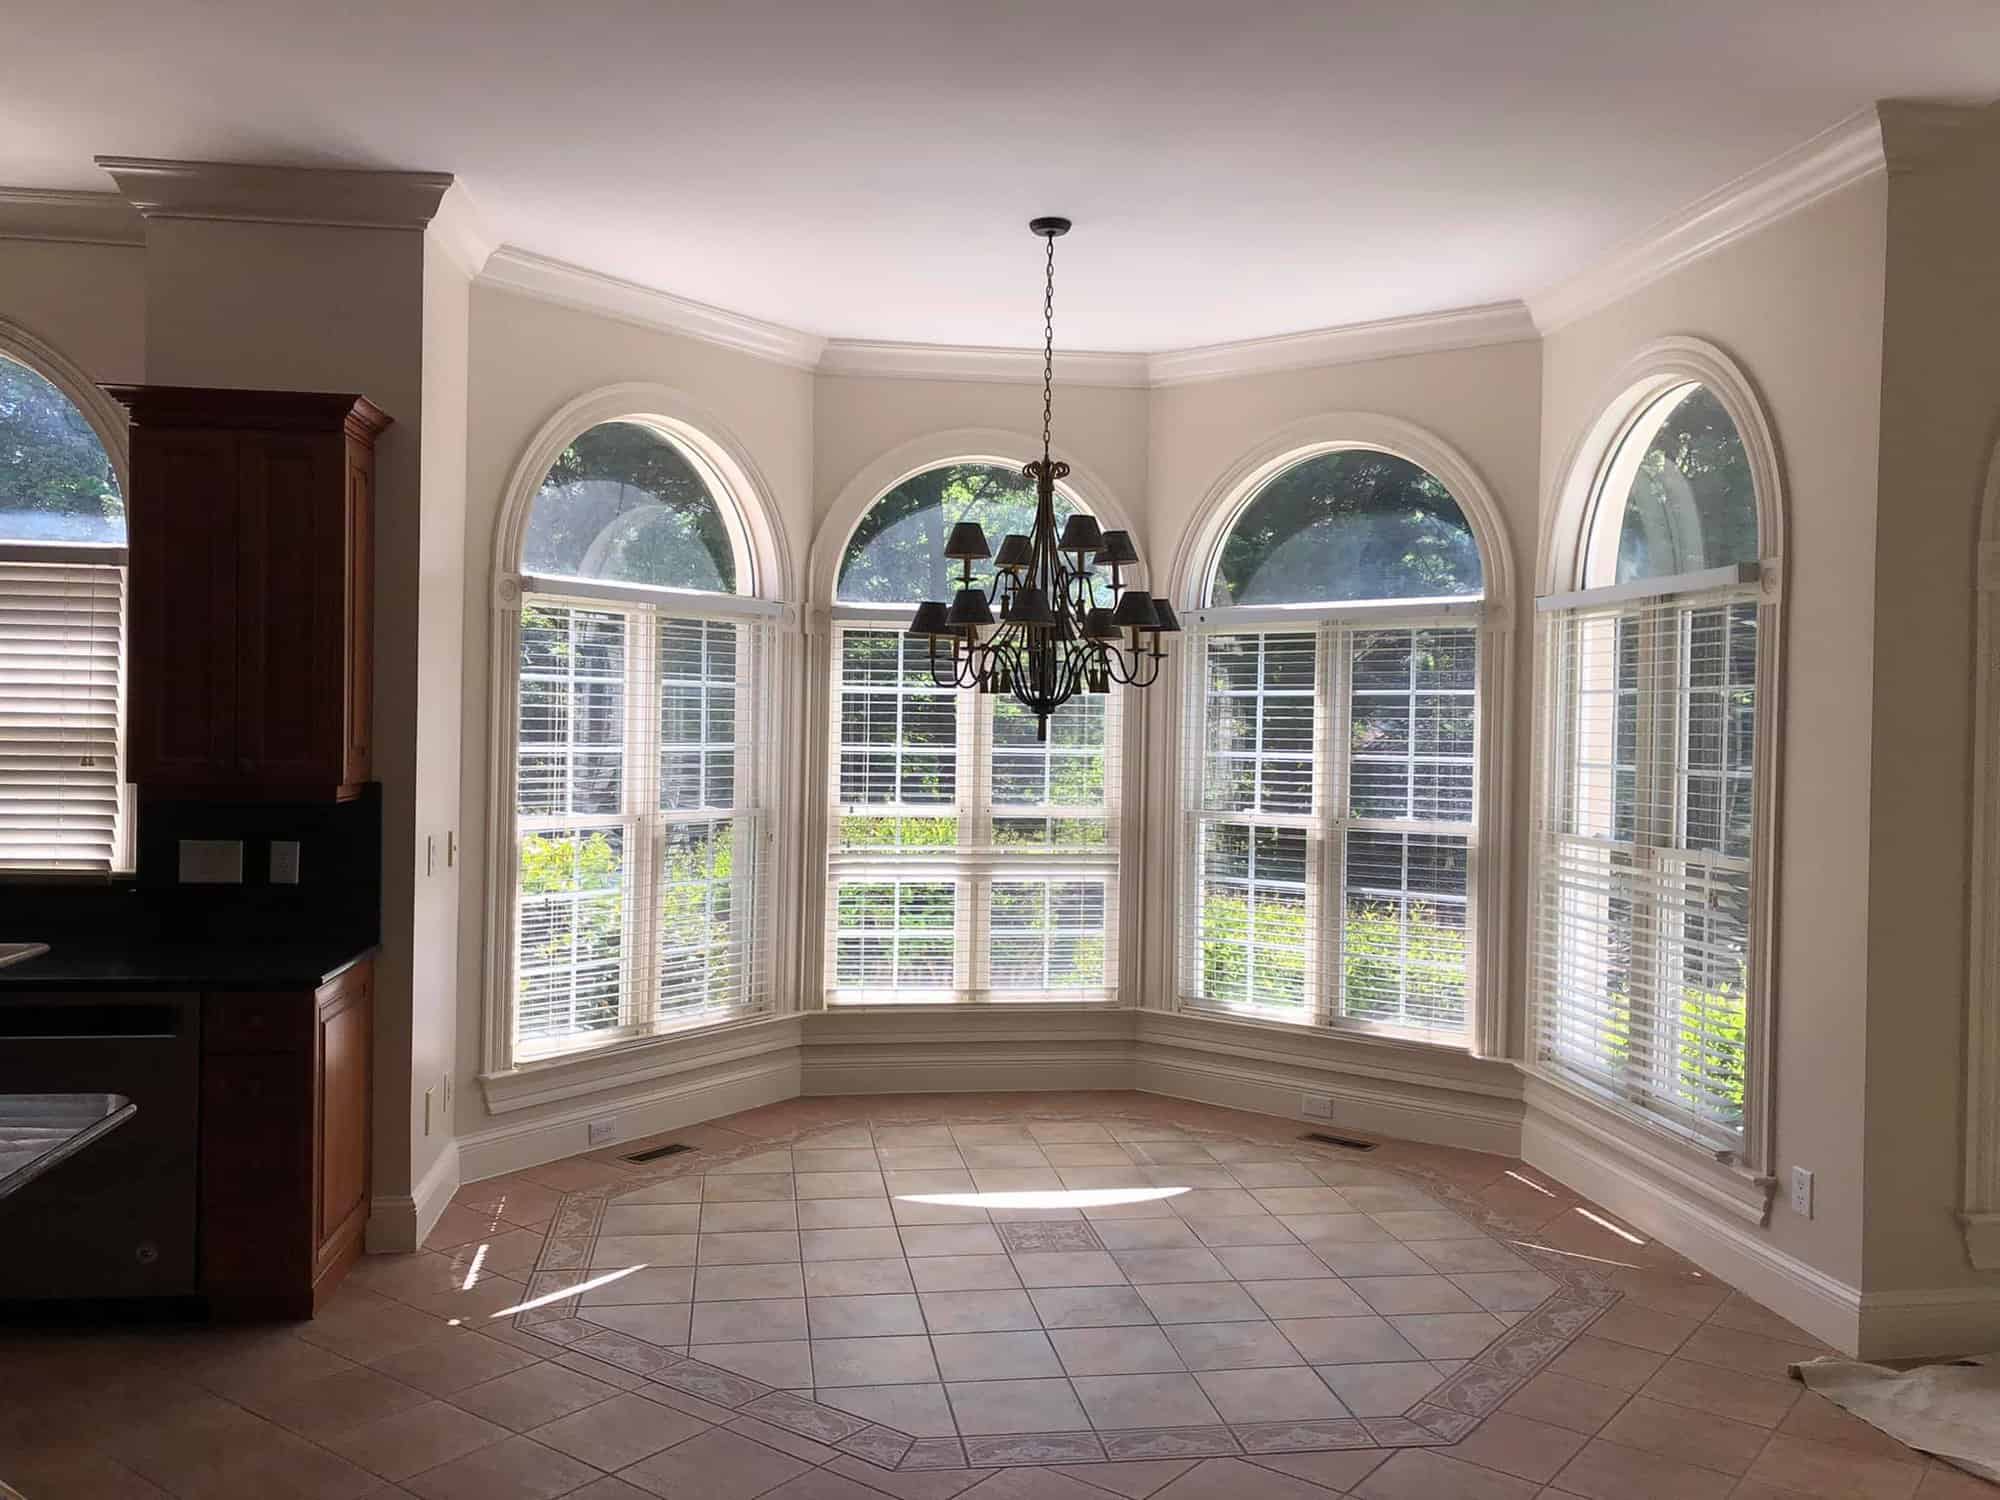 One of the best results from knowing the best frequency of Interior Home Painting in Raleigh, NC, by trusted experts.